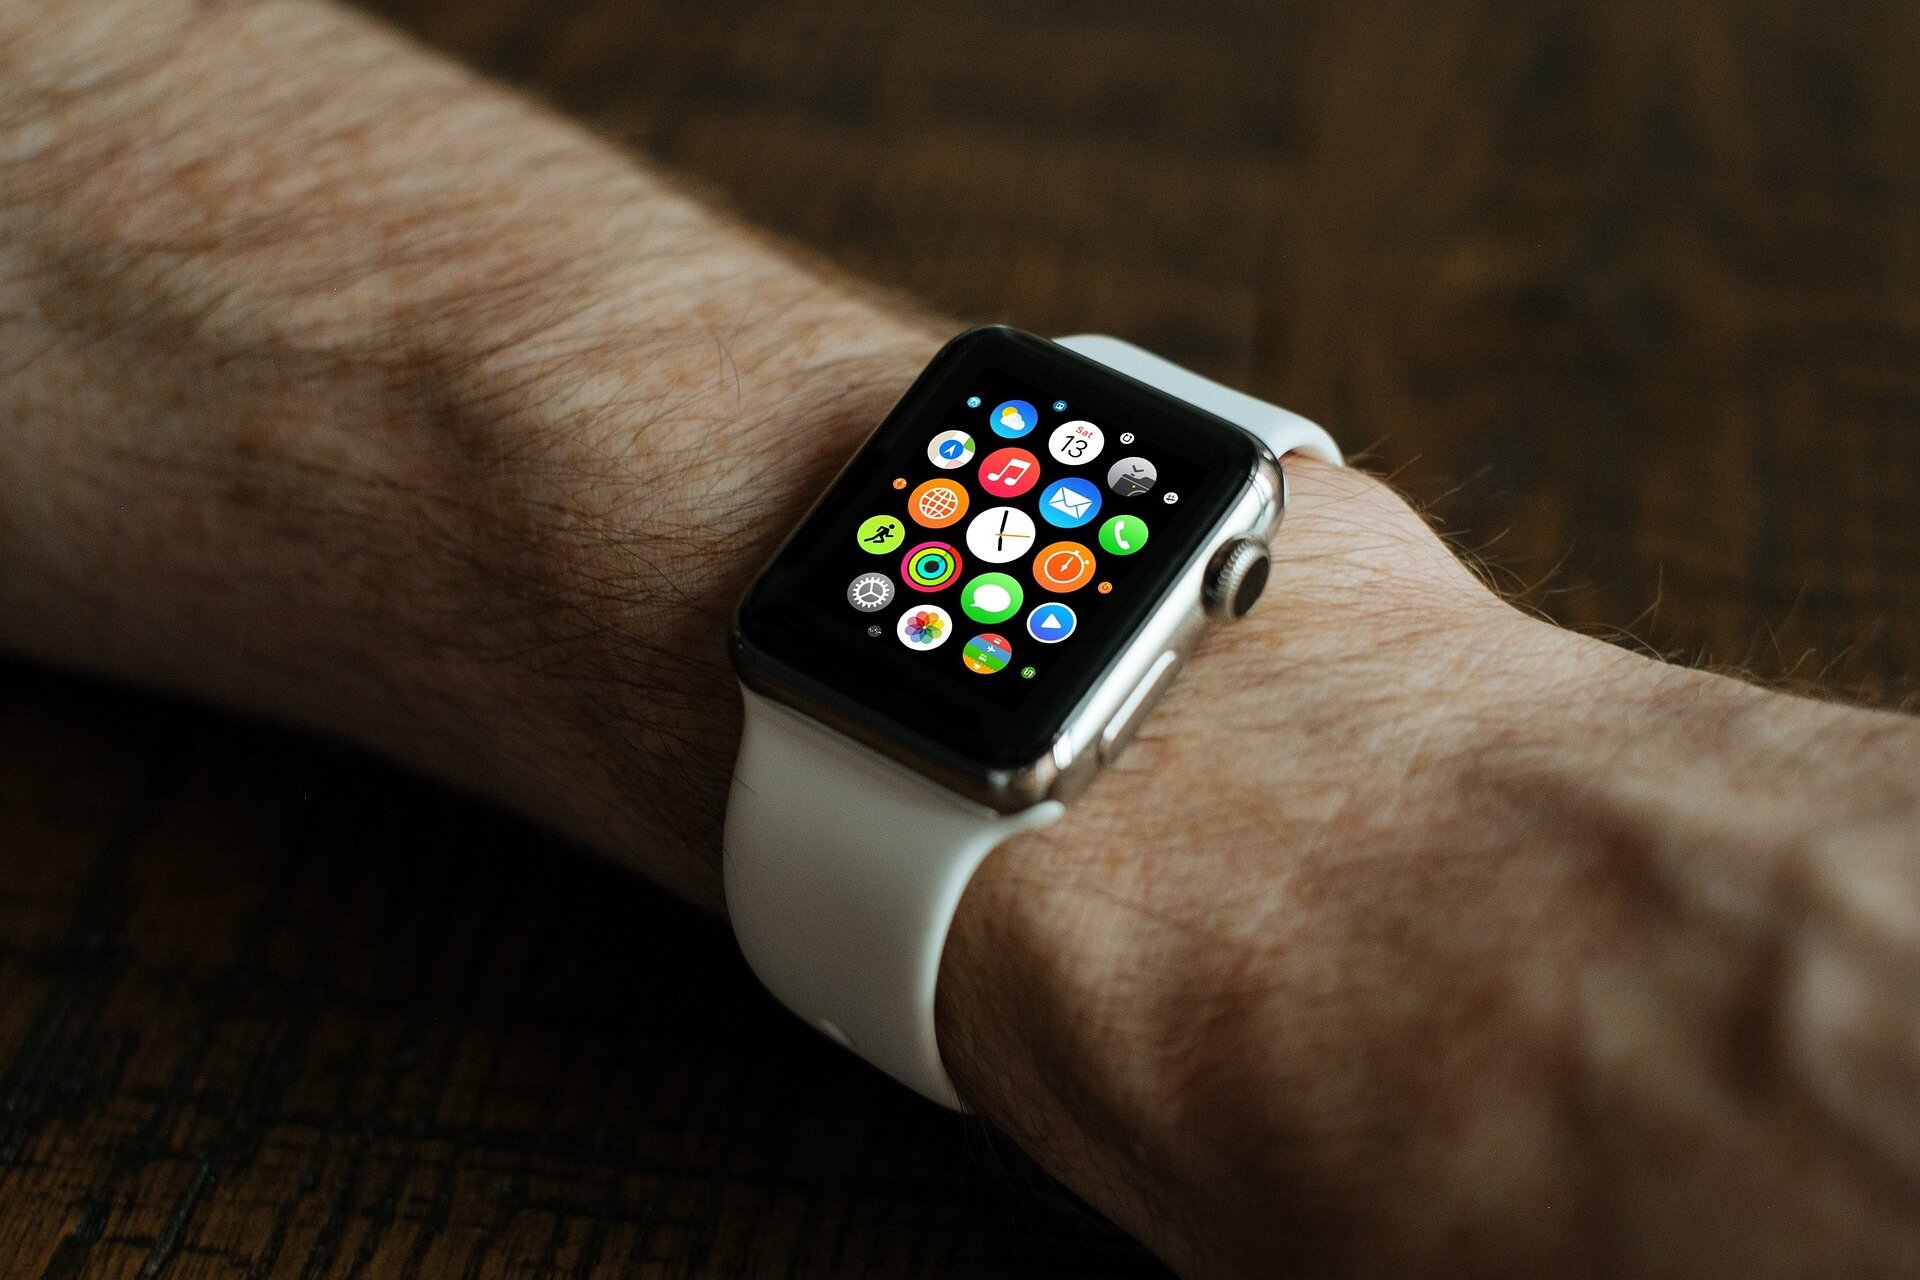 Smart watches can detect symptoms of COVID-19 before the user knows they are infected